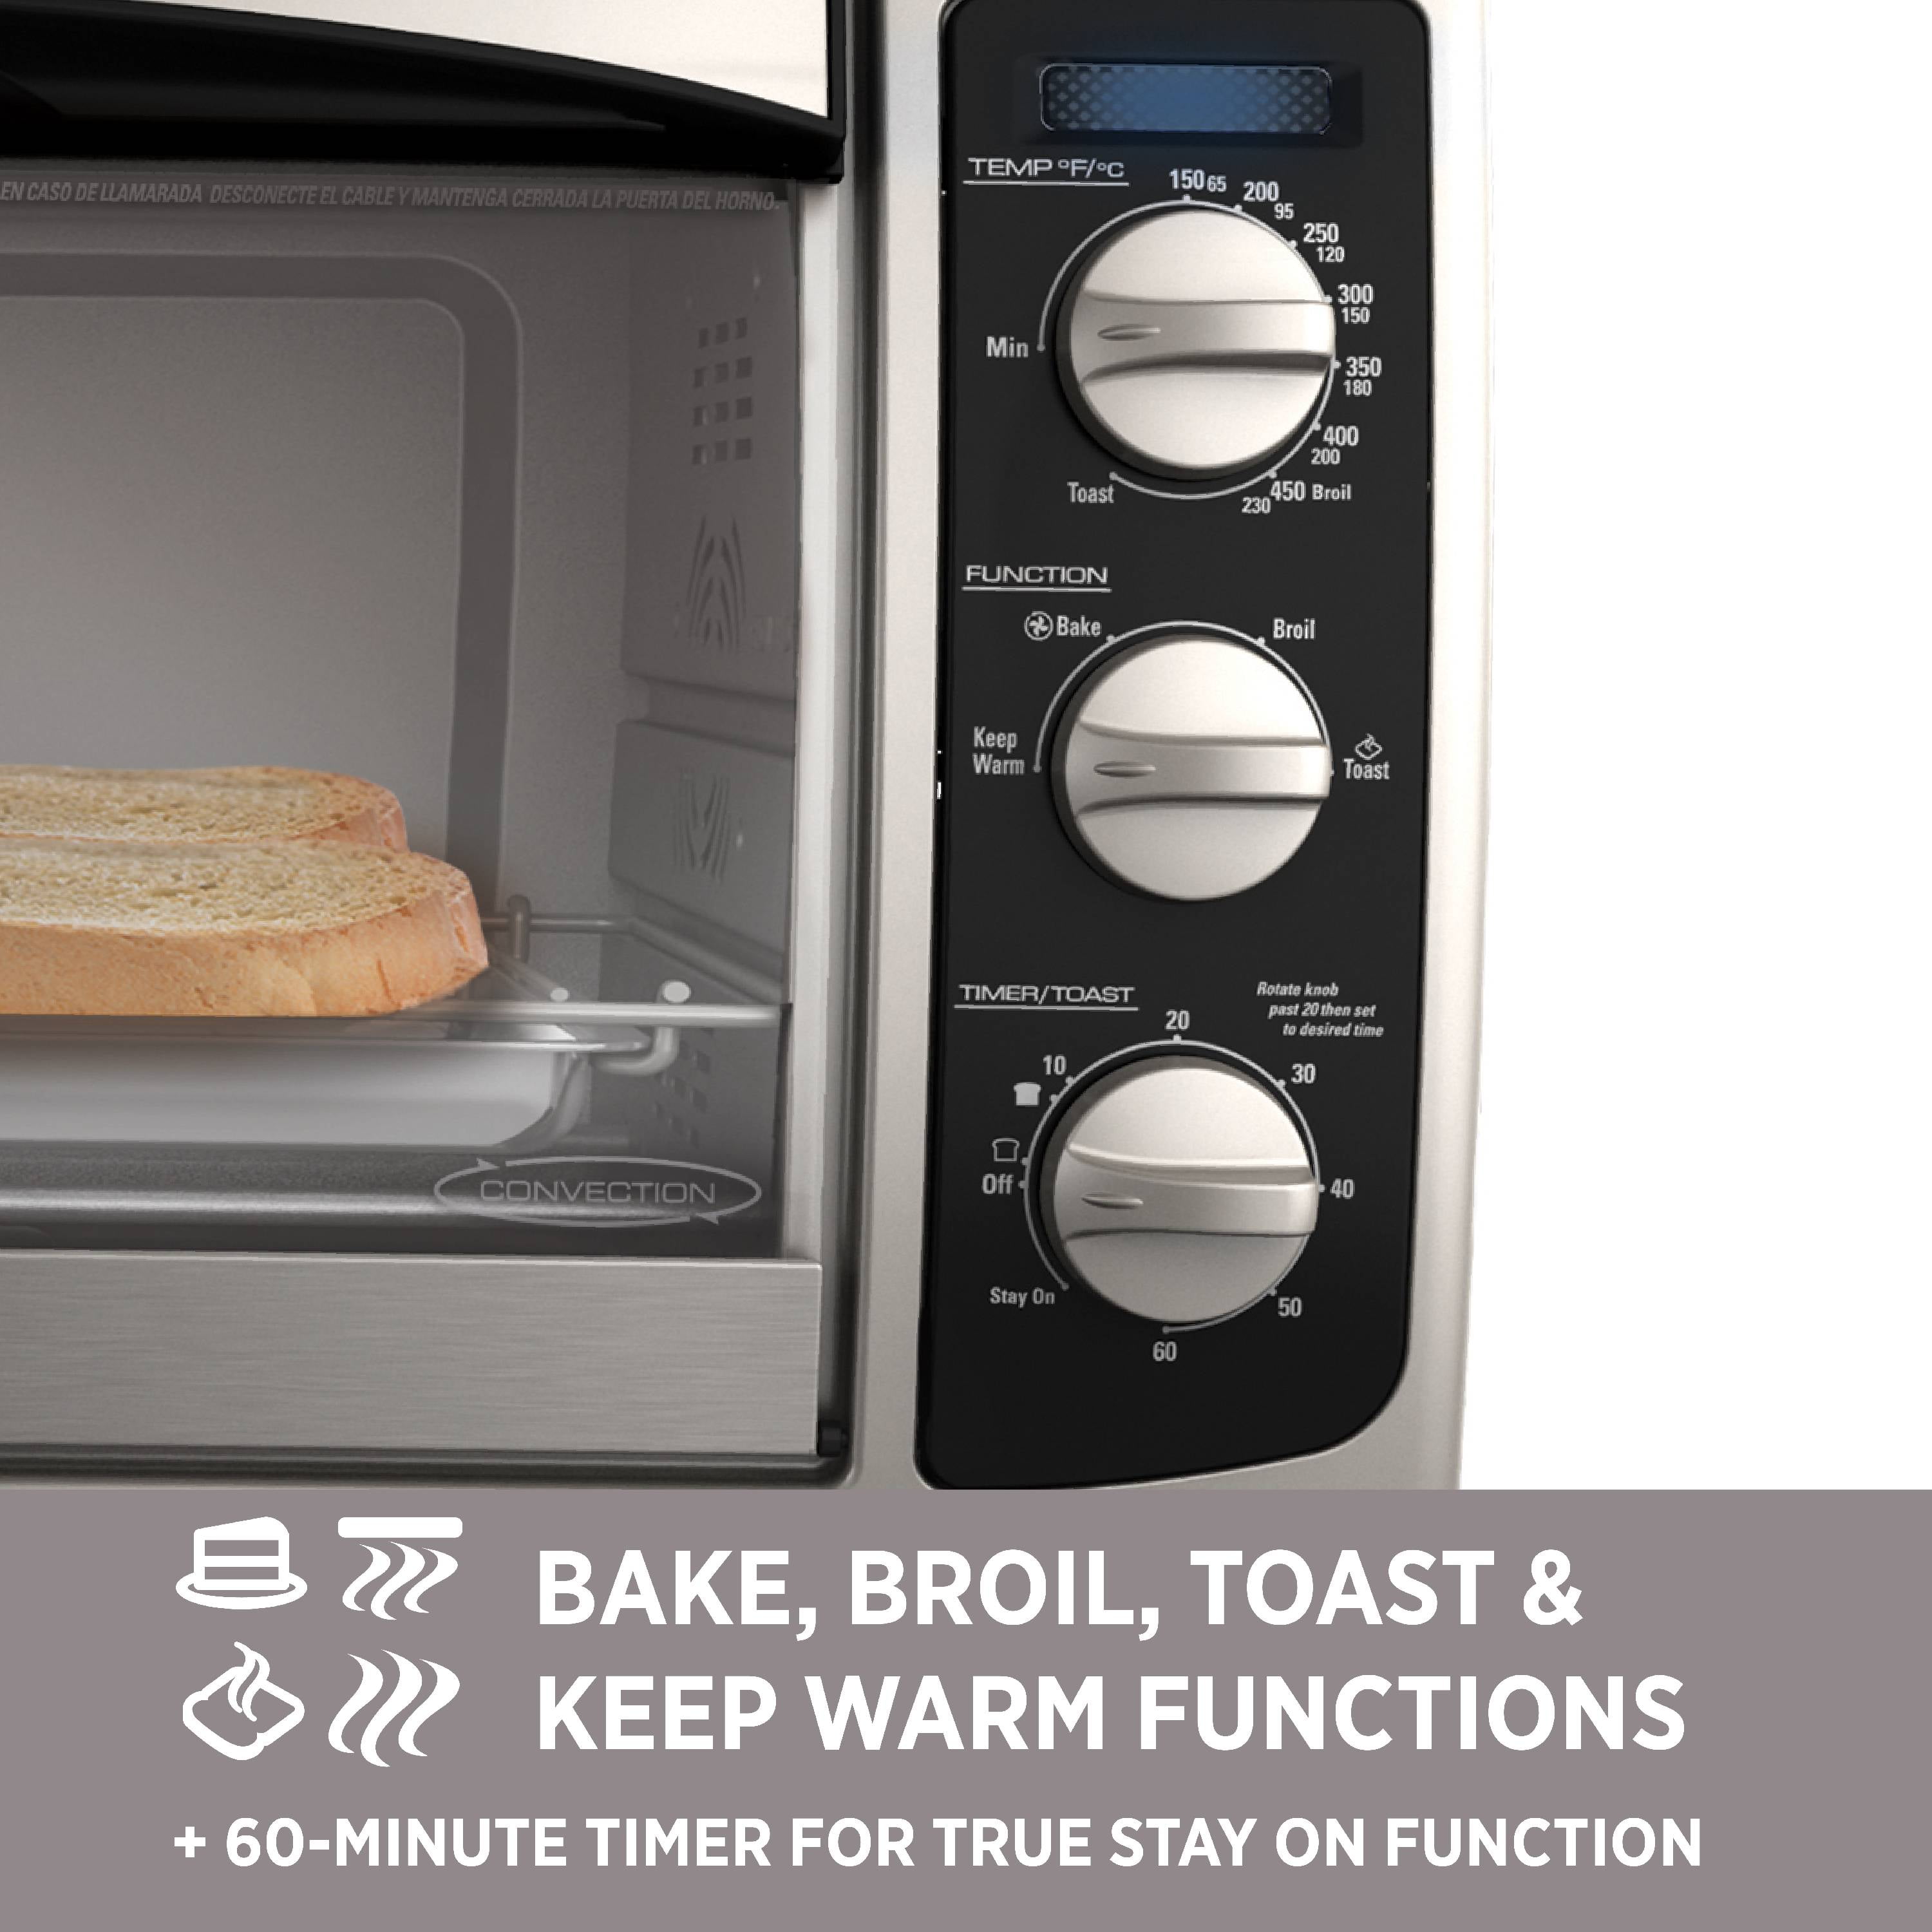 Buy a Convection Oven, Countertop Convection Toaster Oven TO1675B